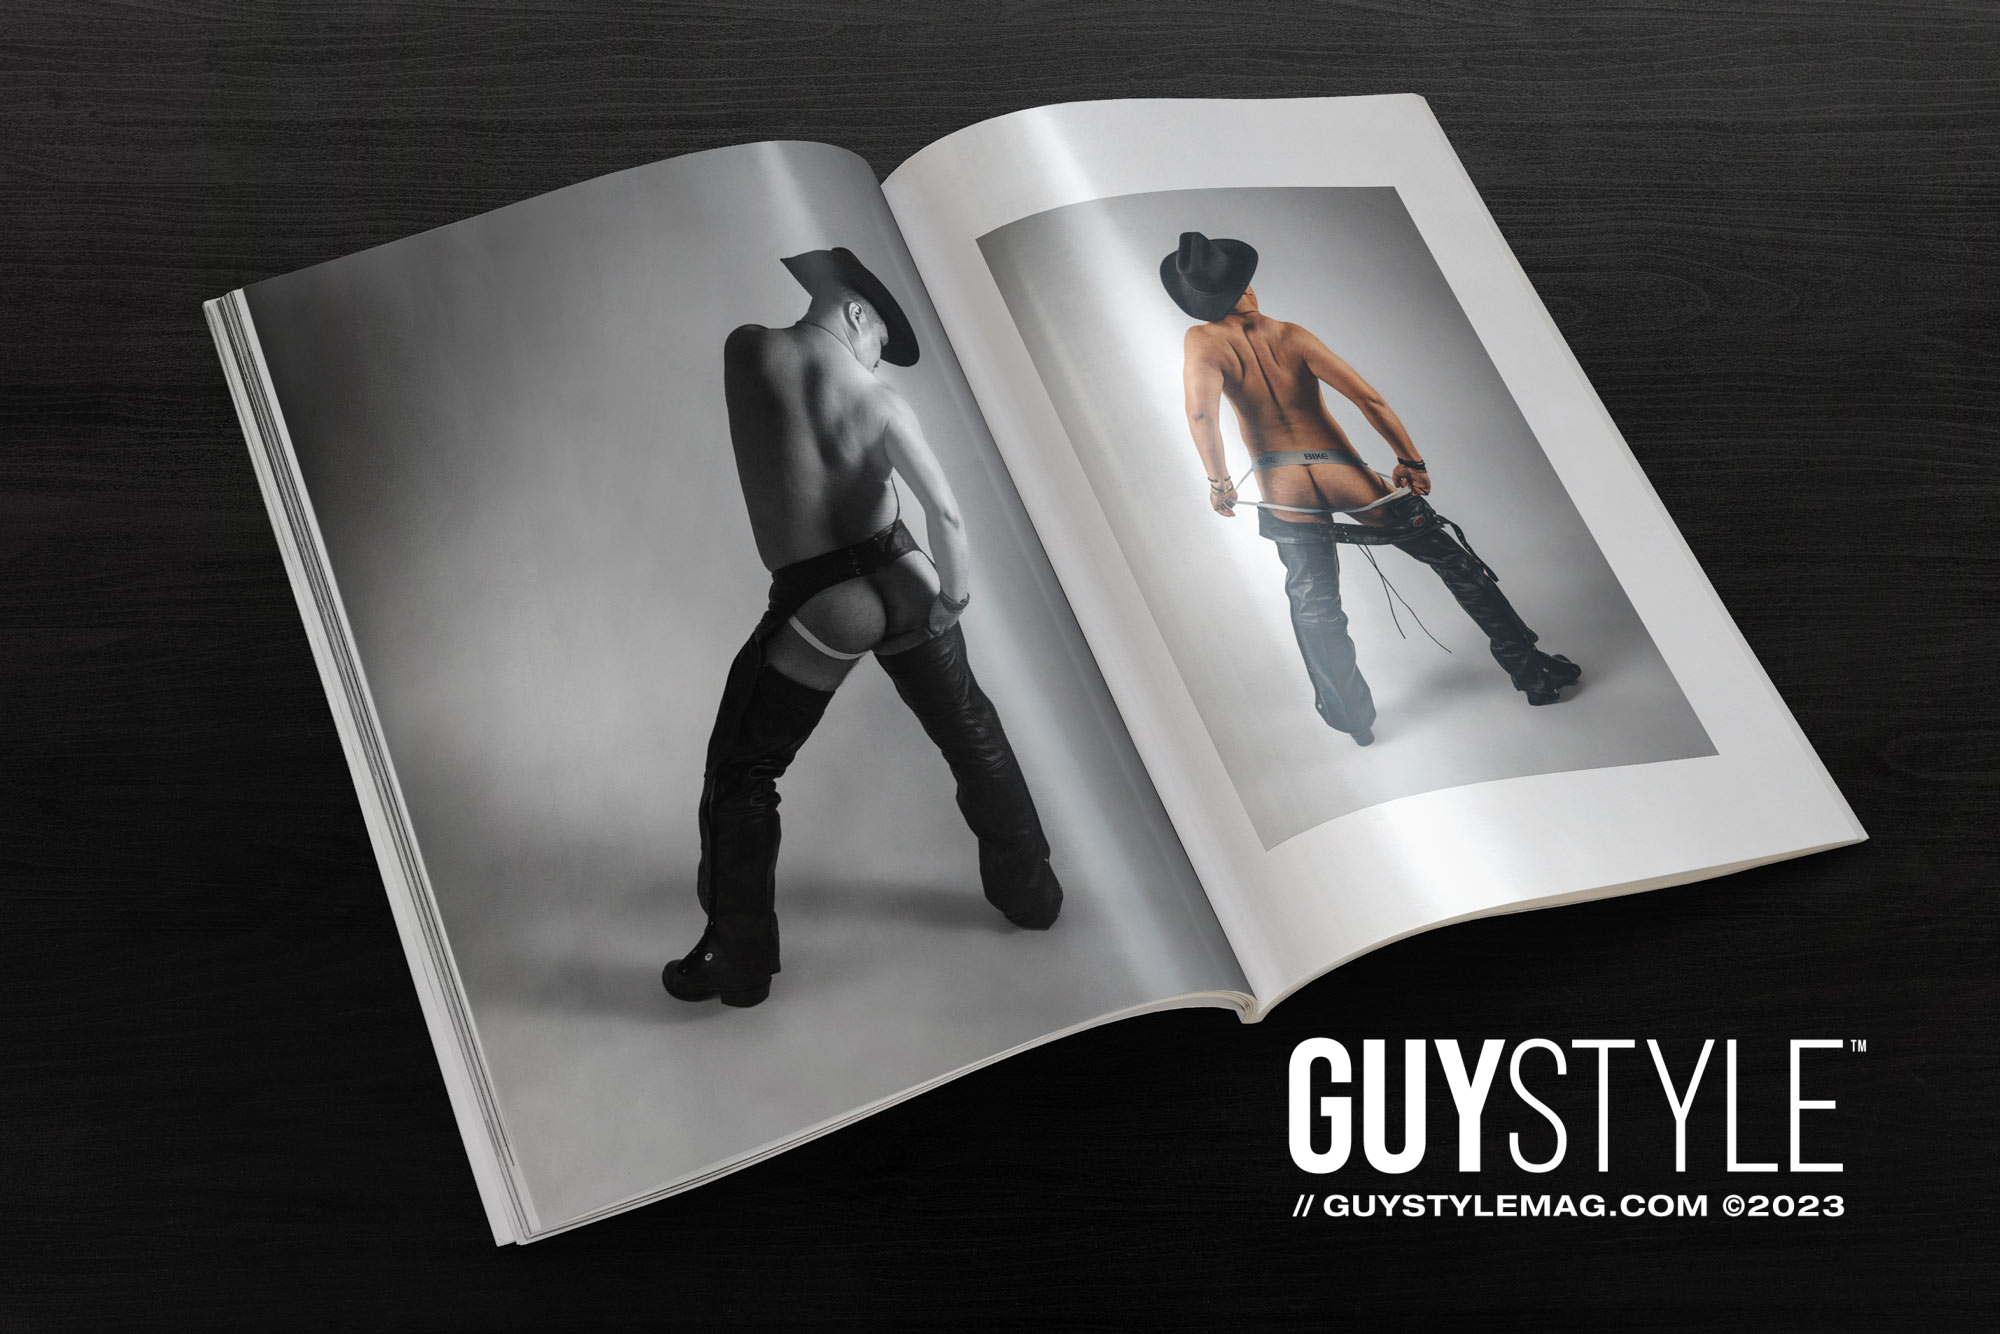 From Royalty to Reverence – The Transformative Power of Male Boudoir Photography": Introducing the First Print Edition of GUY STYLE MAGAZINE